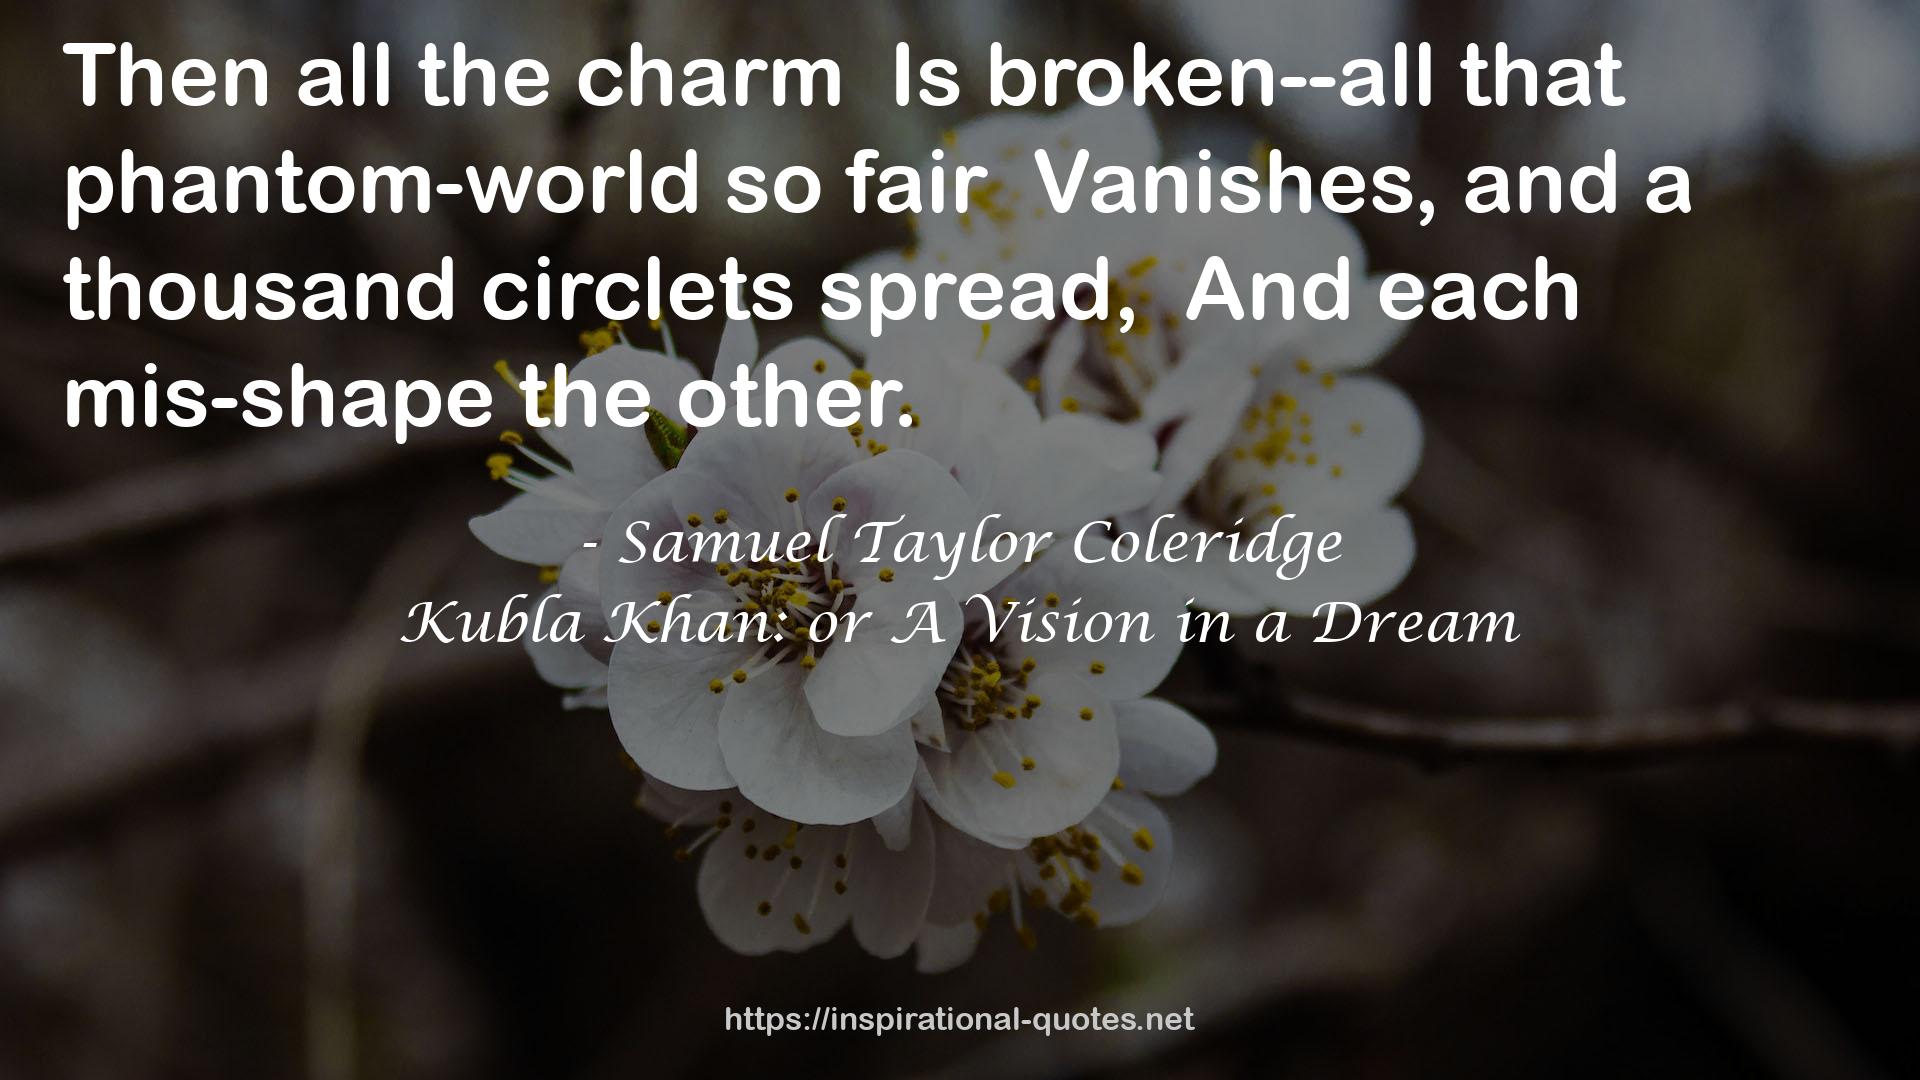 Kubla Khan: or A Vision in a Dream QUOTES